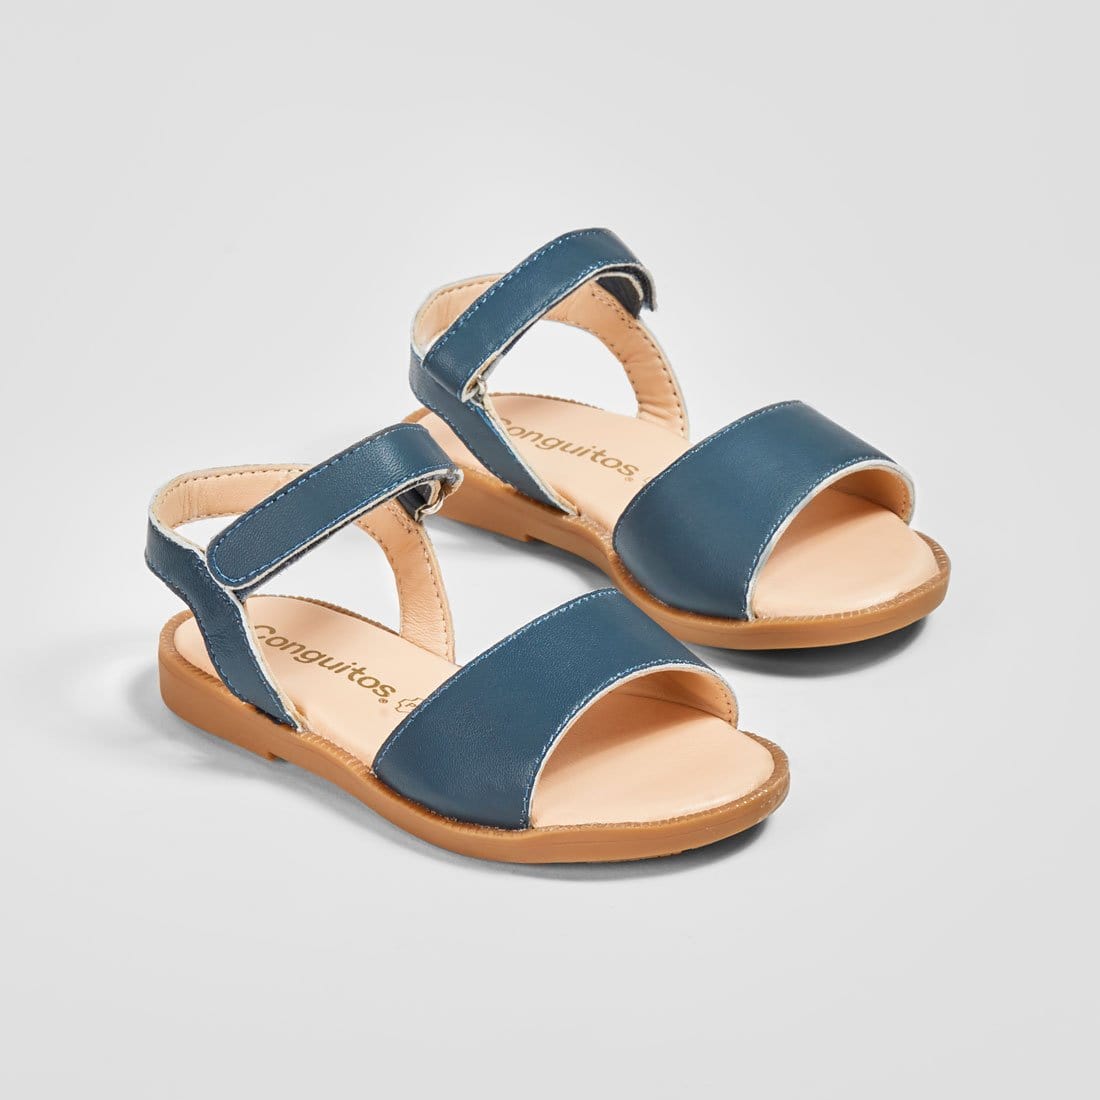 CONGUITOS Shoes Girl's Navy Leather Sandals